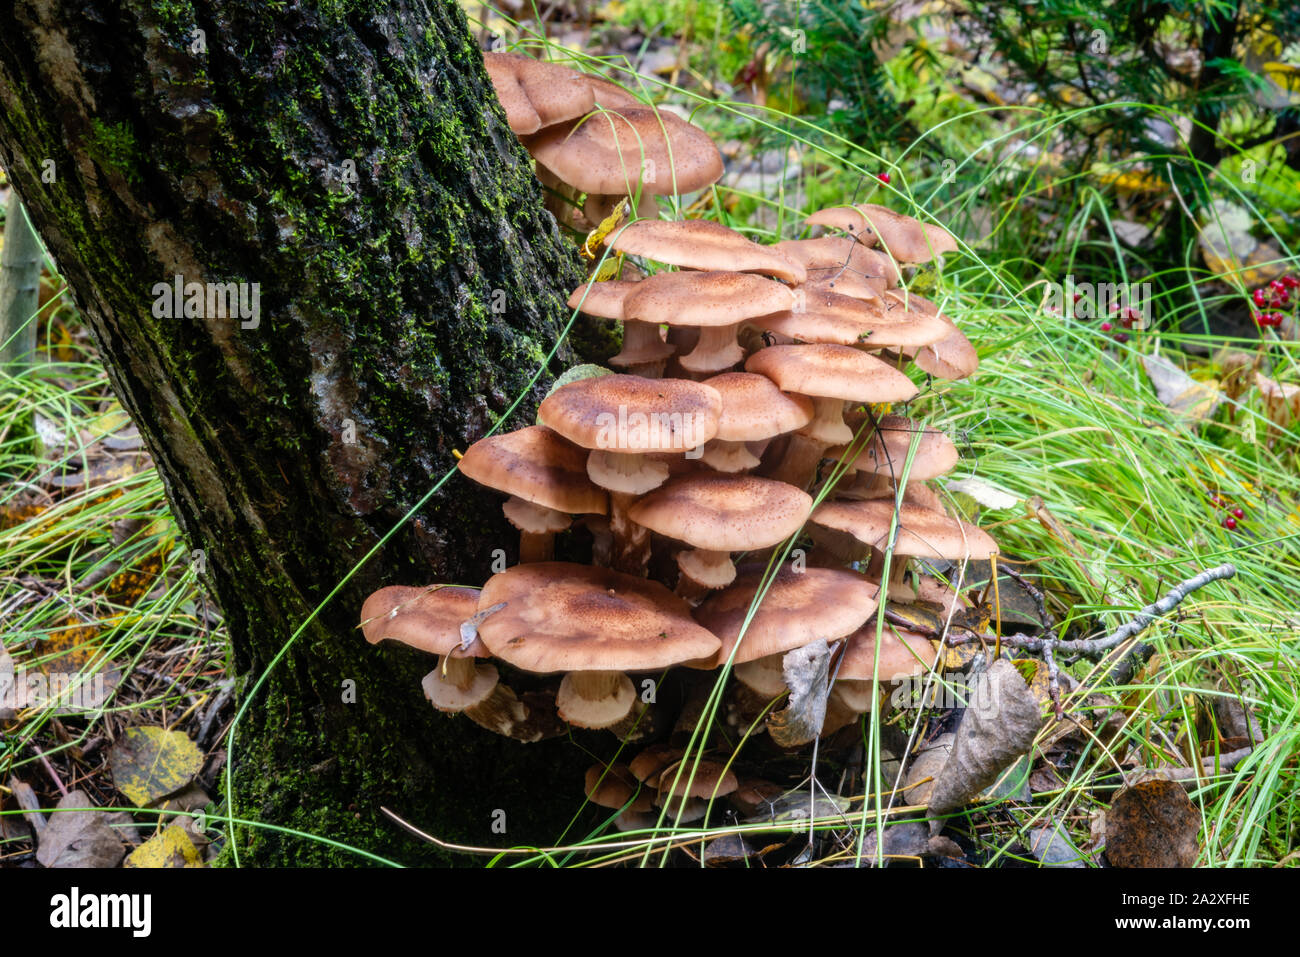 Honey mushrooms in the forest Stock Photo